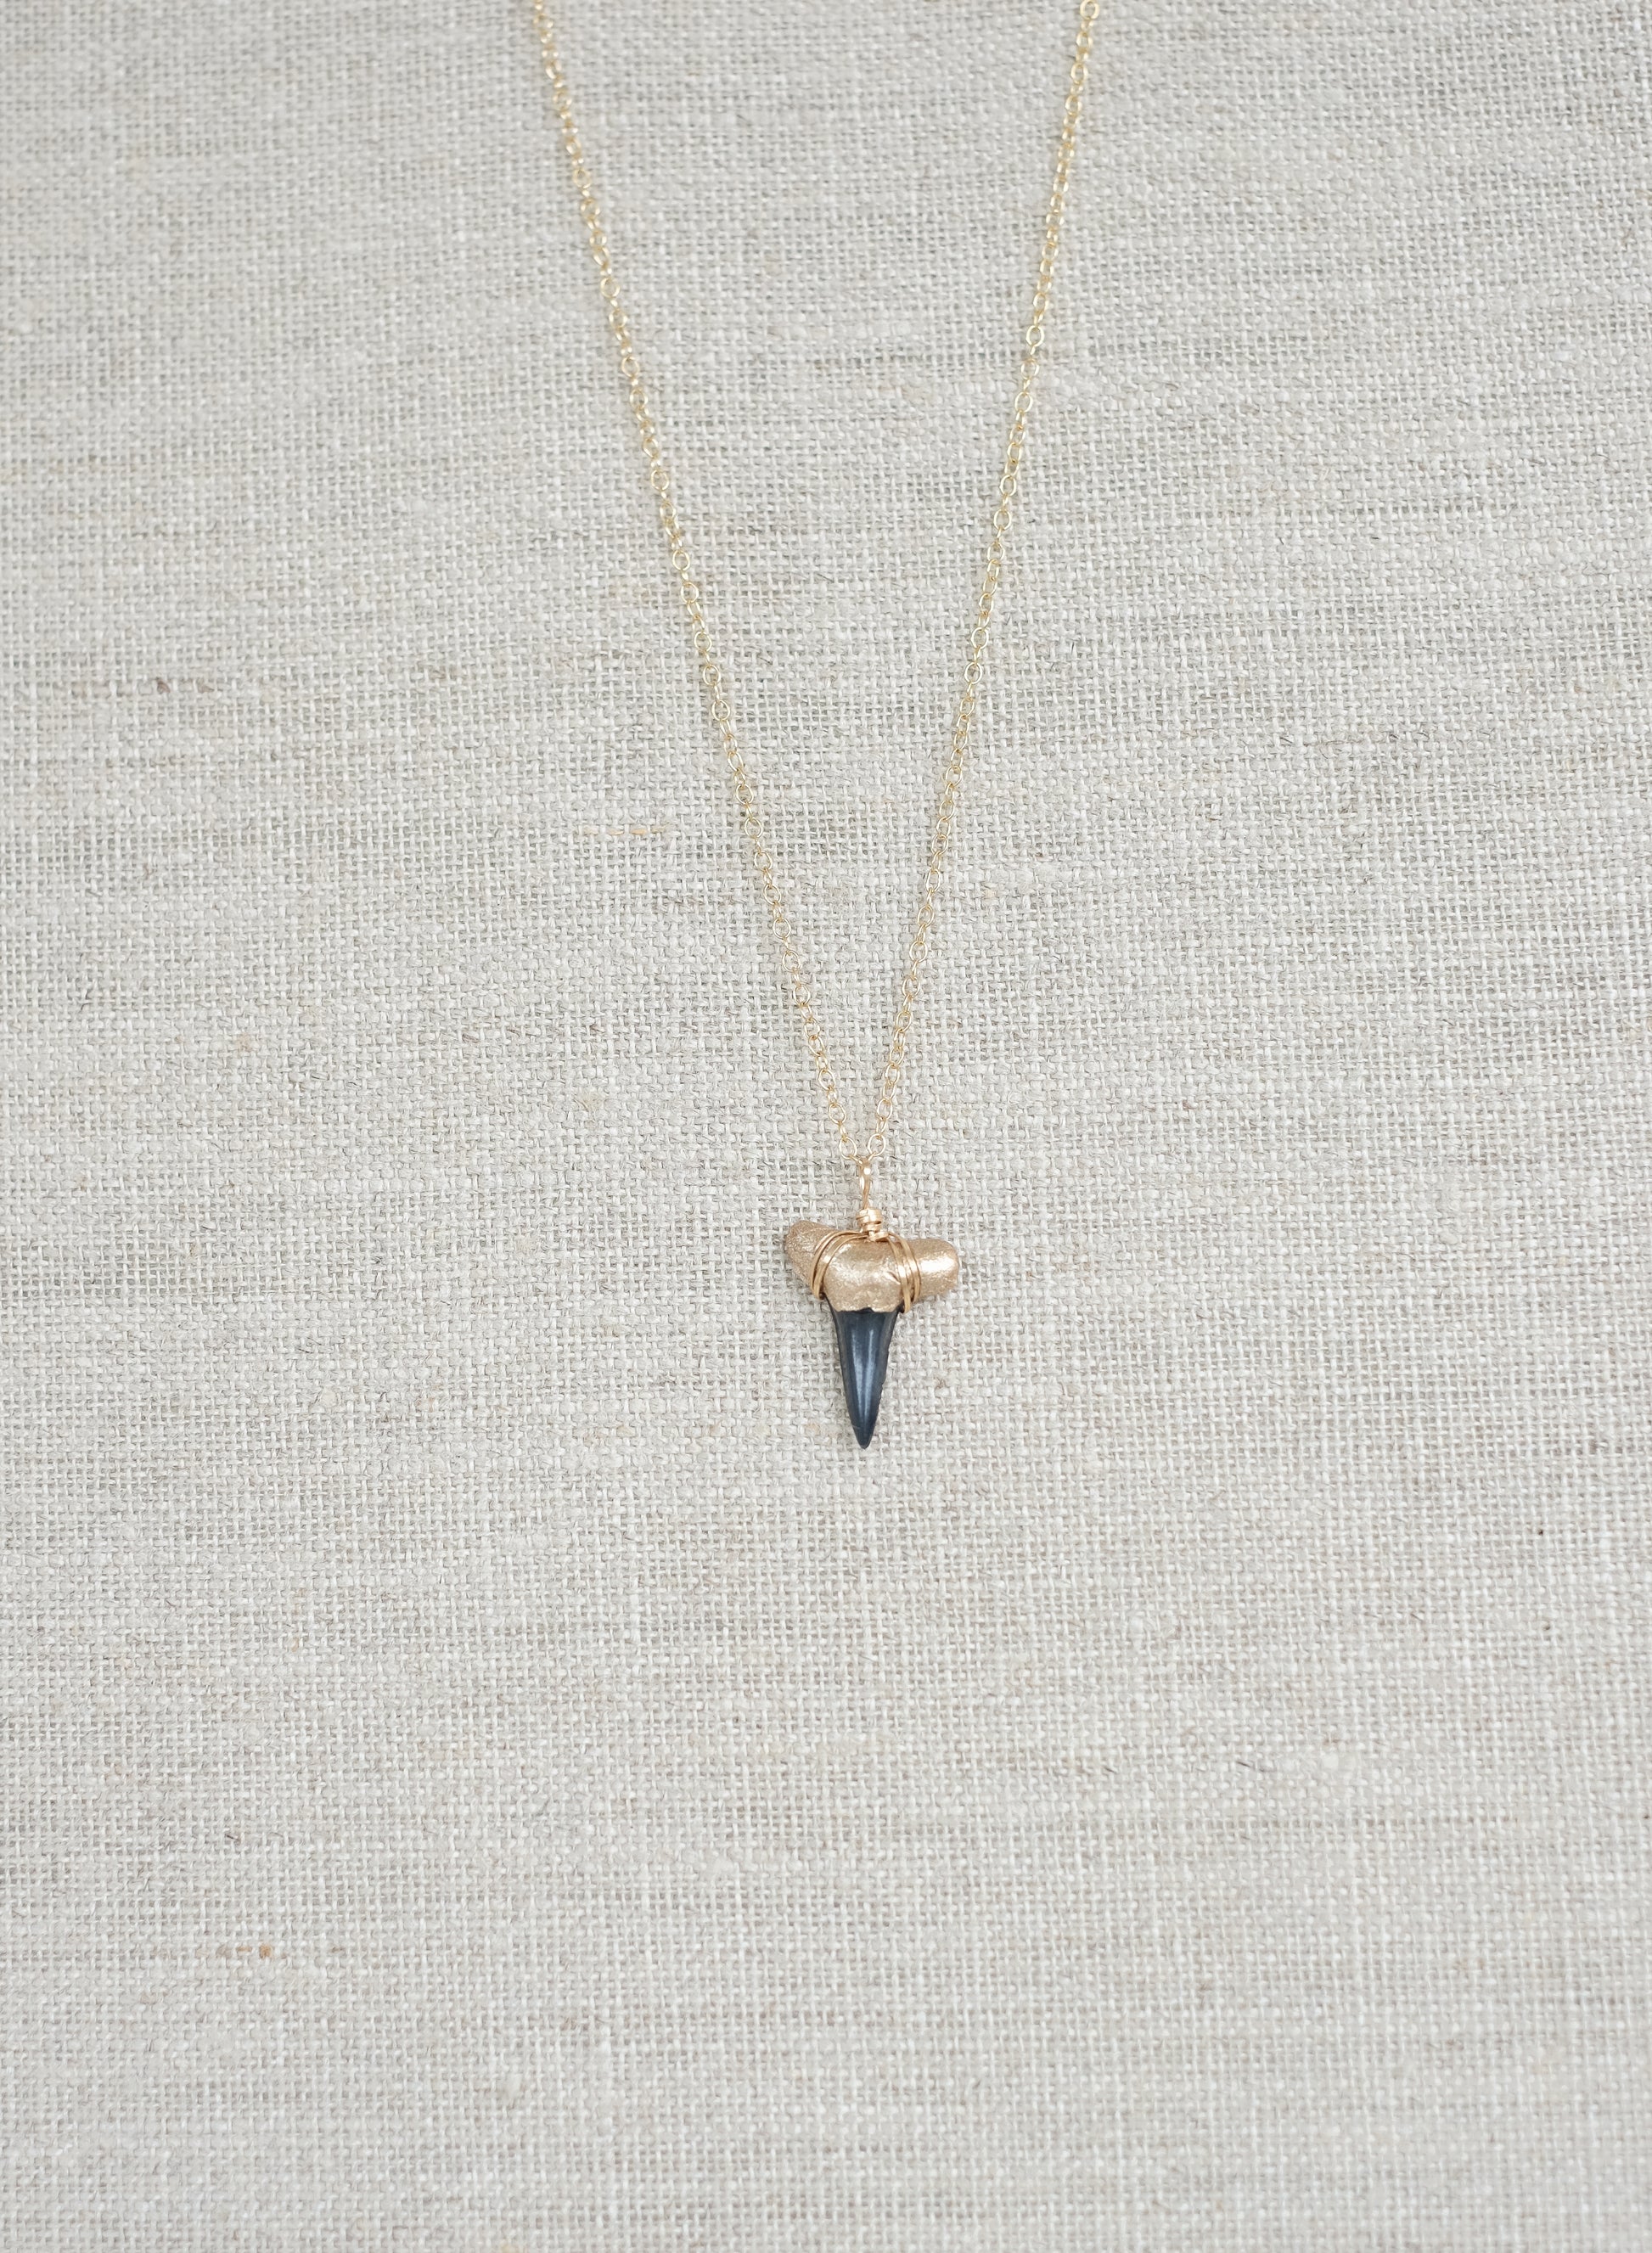 Gold-Tip Shark Tooth Necklace - Foxy Fossils